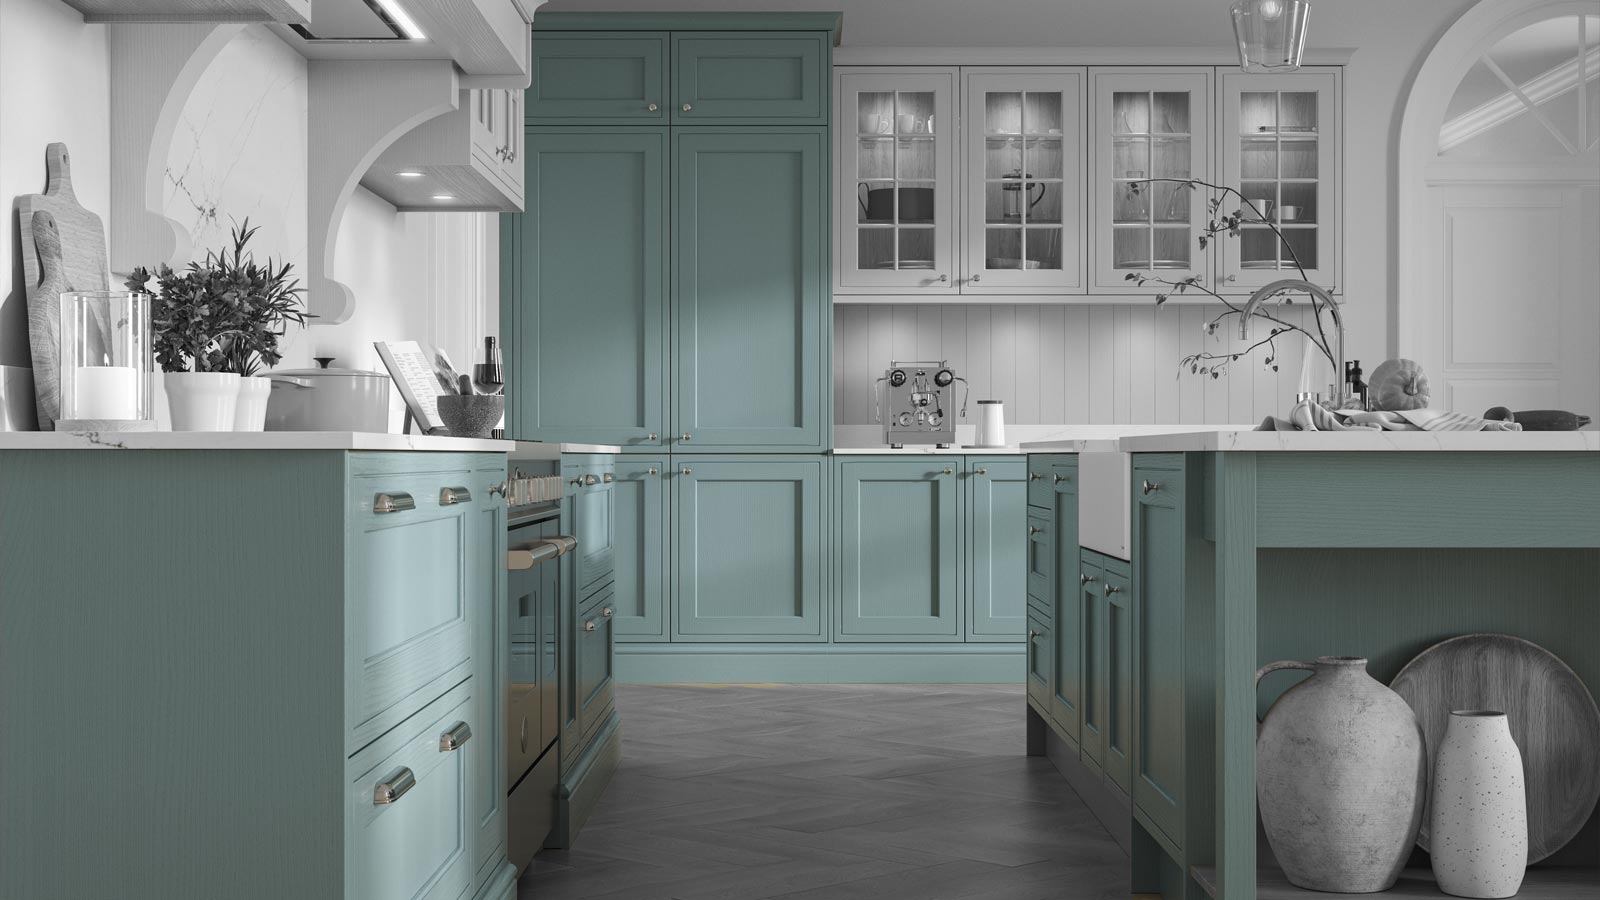 A turquoise kitchen with a grey and teal kitchen island